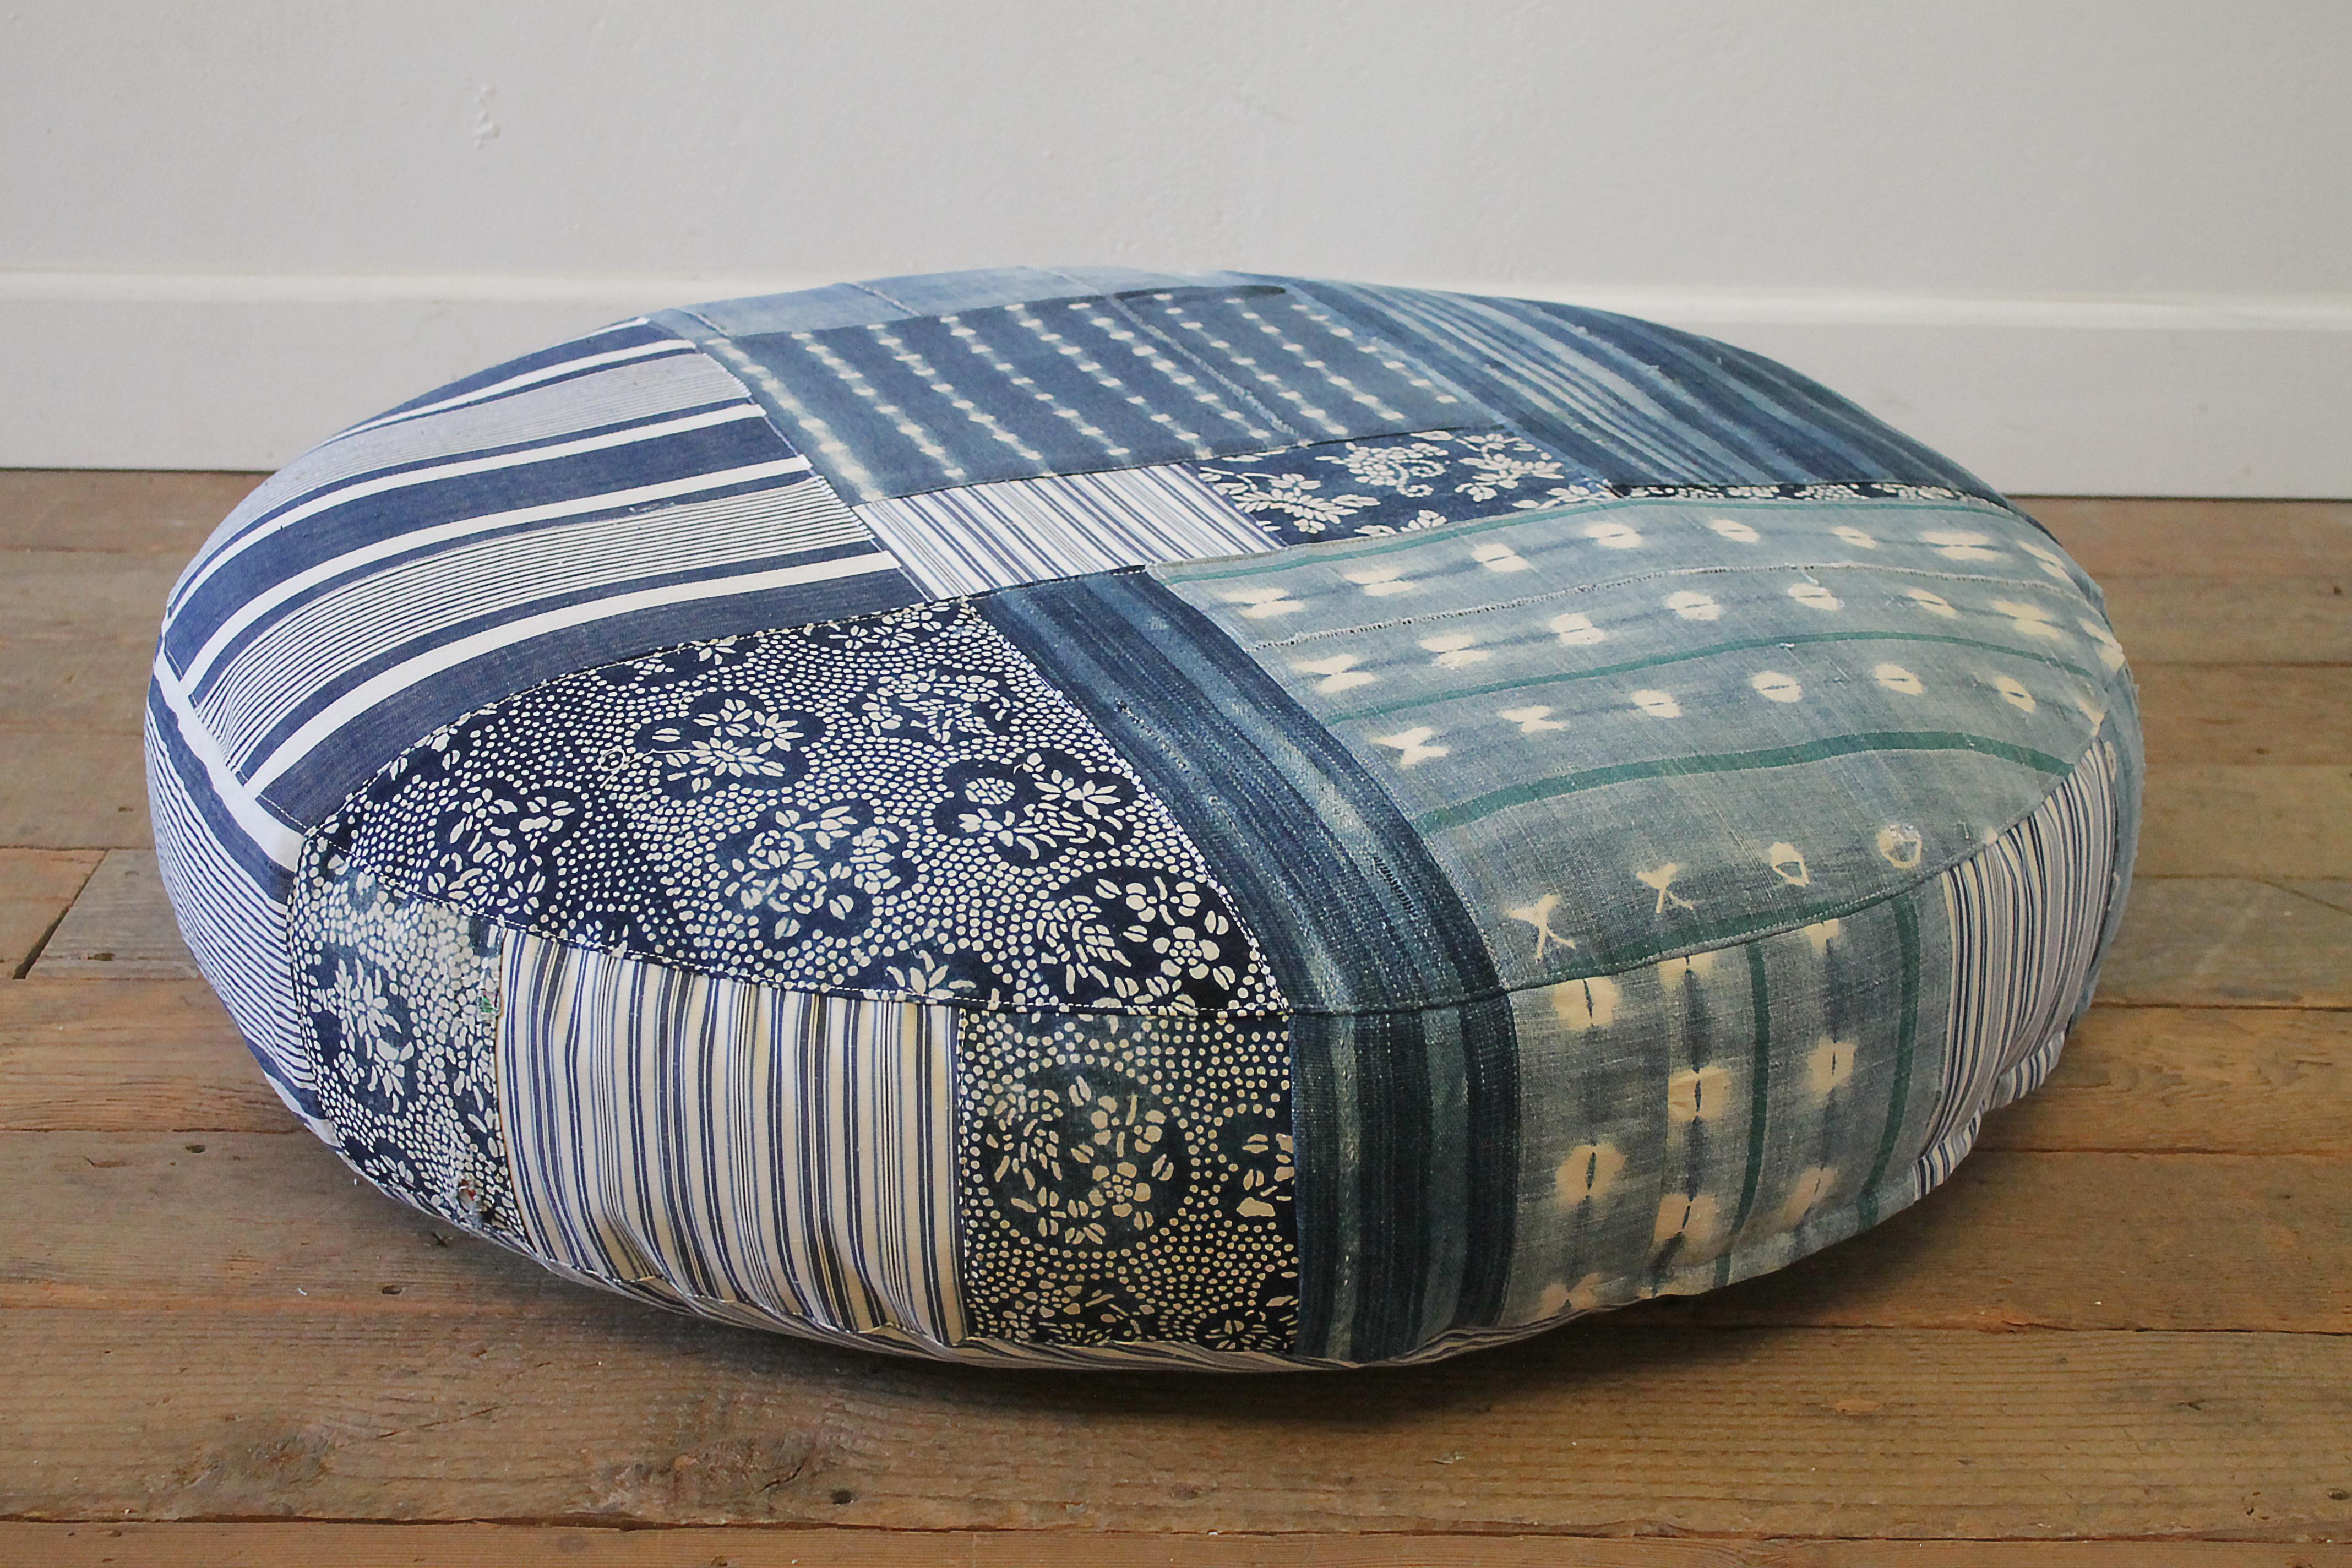 Round pet bed made from vintage batik mud cloth Indigo textiles. Custom made in our full bloom cottage studio, from vintage and antique textiles. A French mattress ticking stripe, antique Japanese batik, and African mud cloths make up this ultra